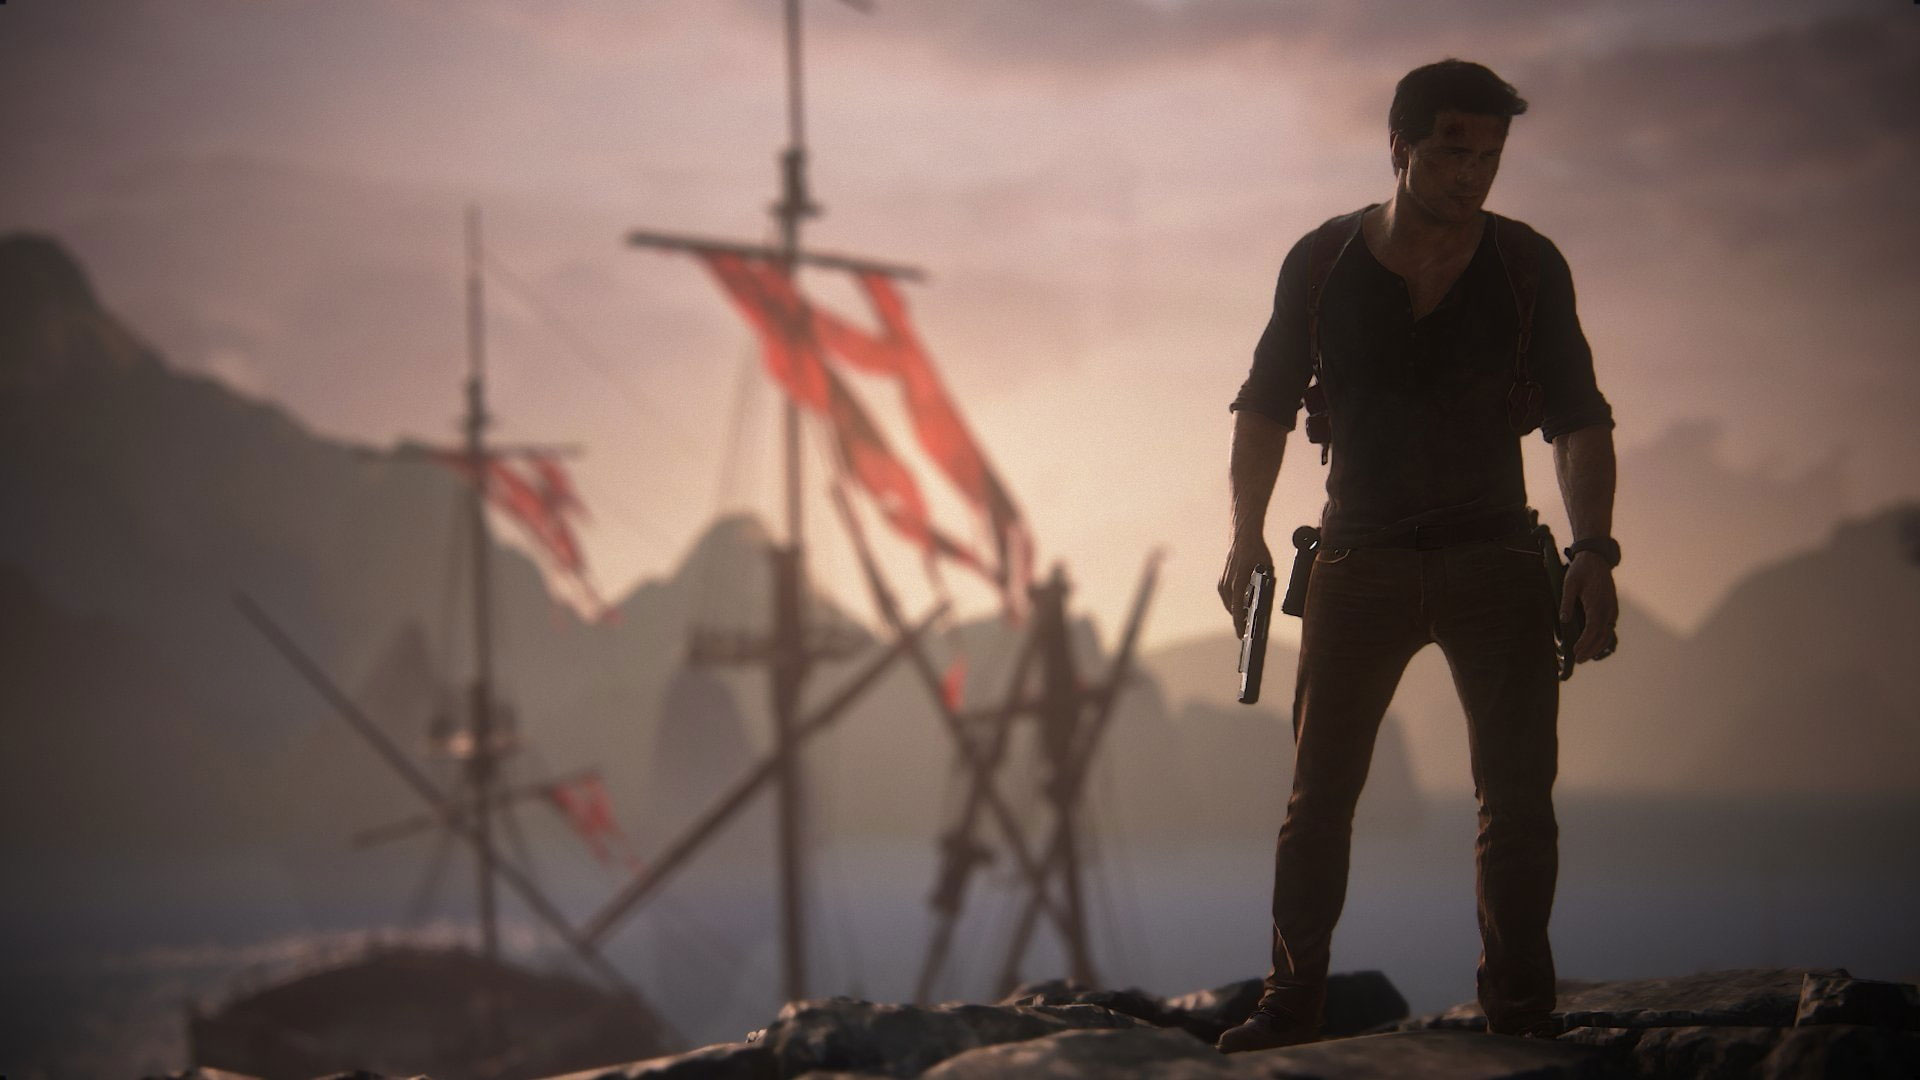 Wallpaper Uncharted, Uncharted 4 A Thiefs End